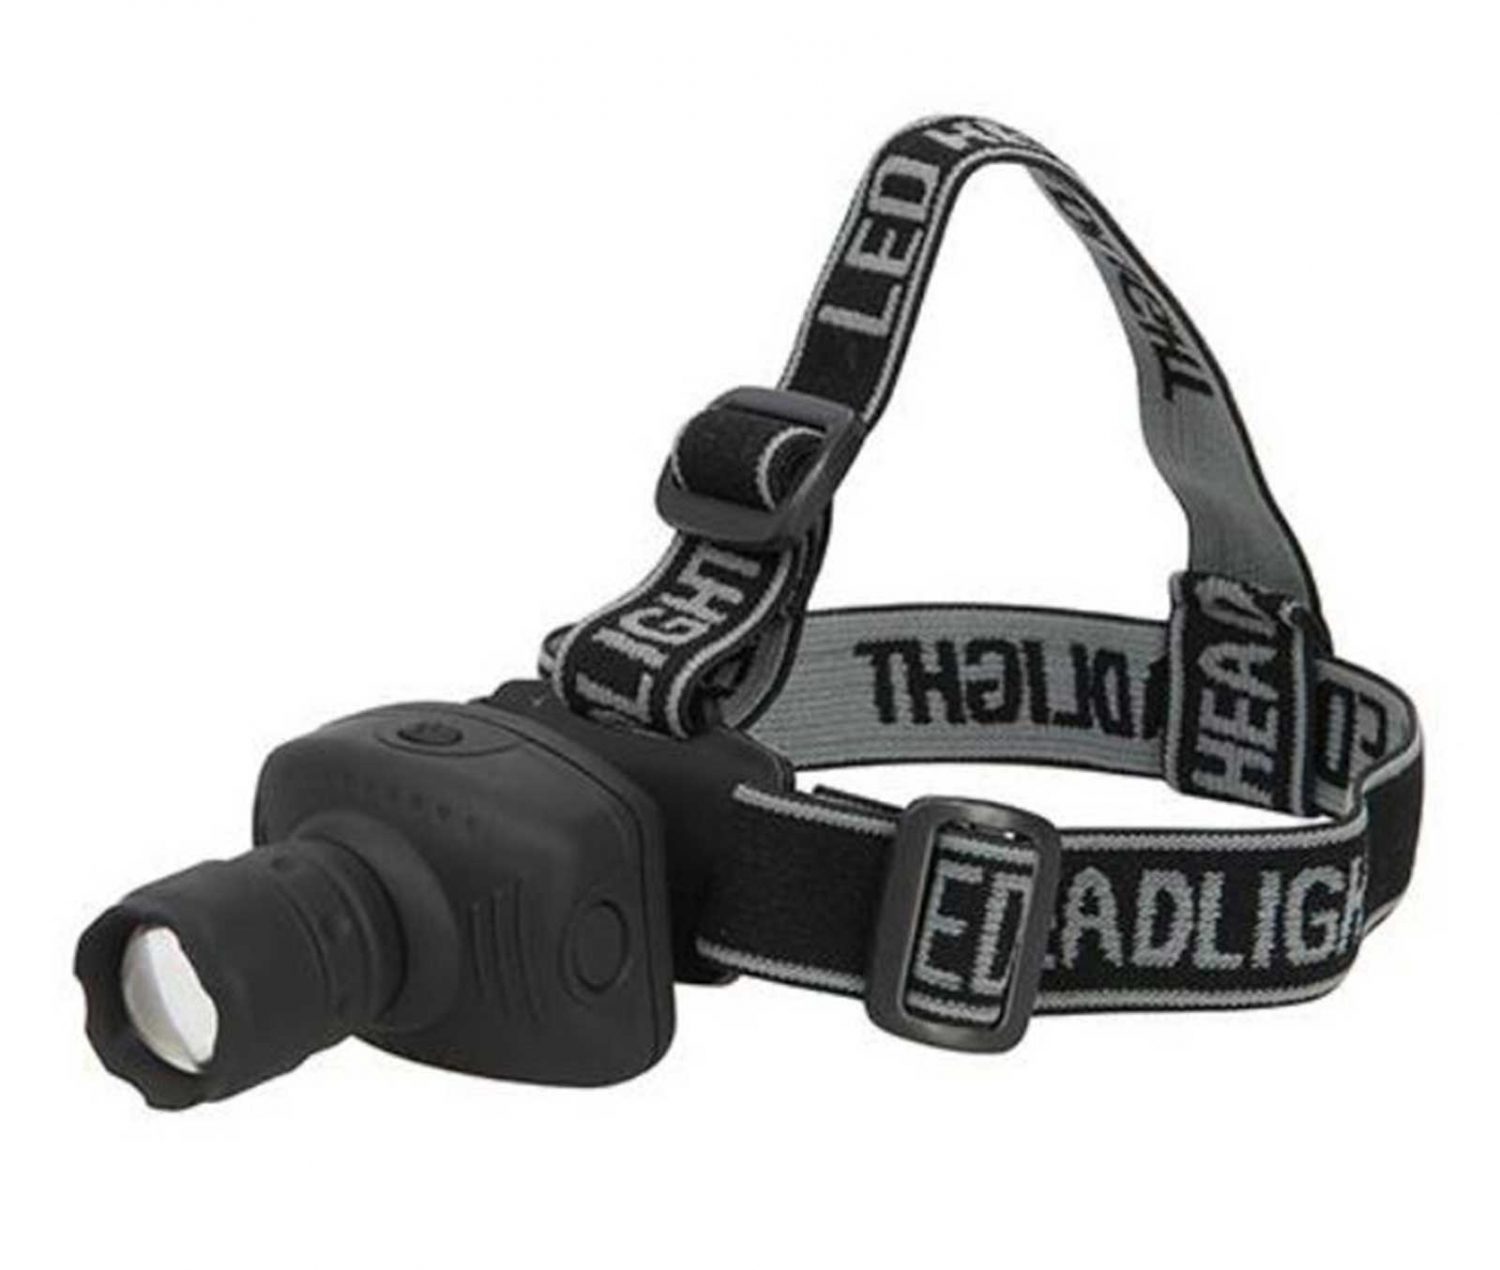 LED HEAD TORCH - Rustbuster